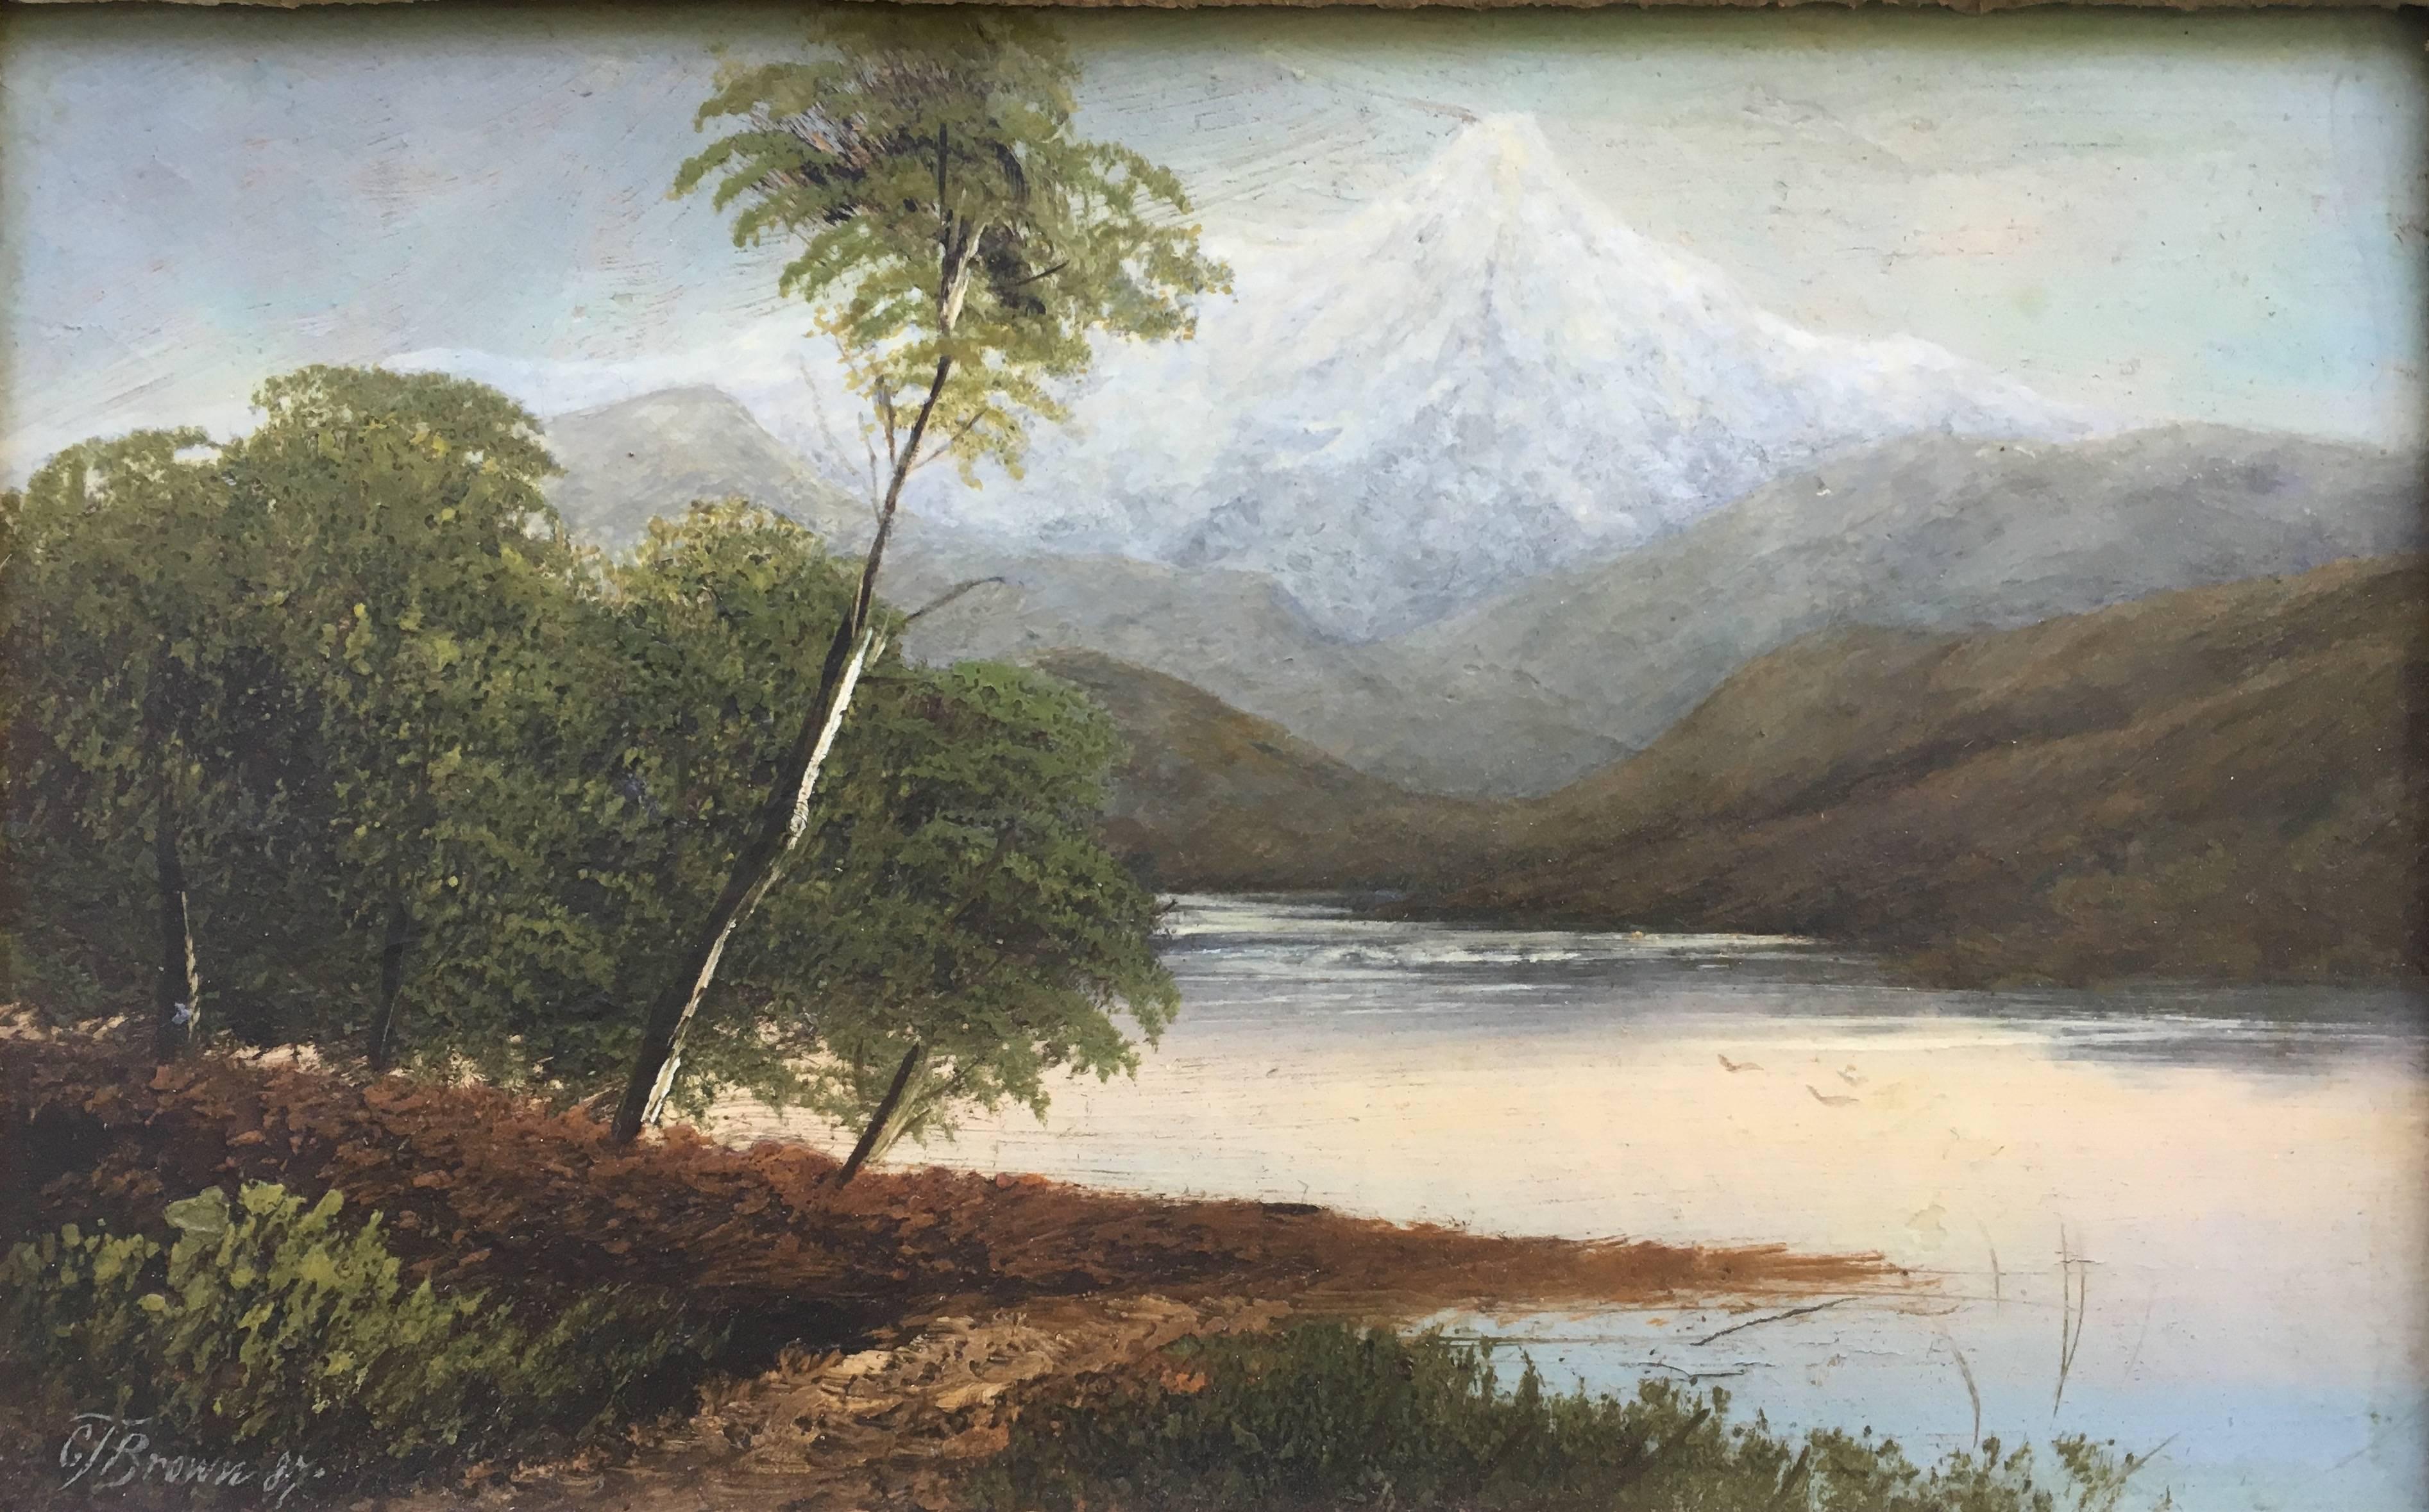 Lake Scene with Snow Capped Mountain - Painting by Grafton Brown